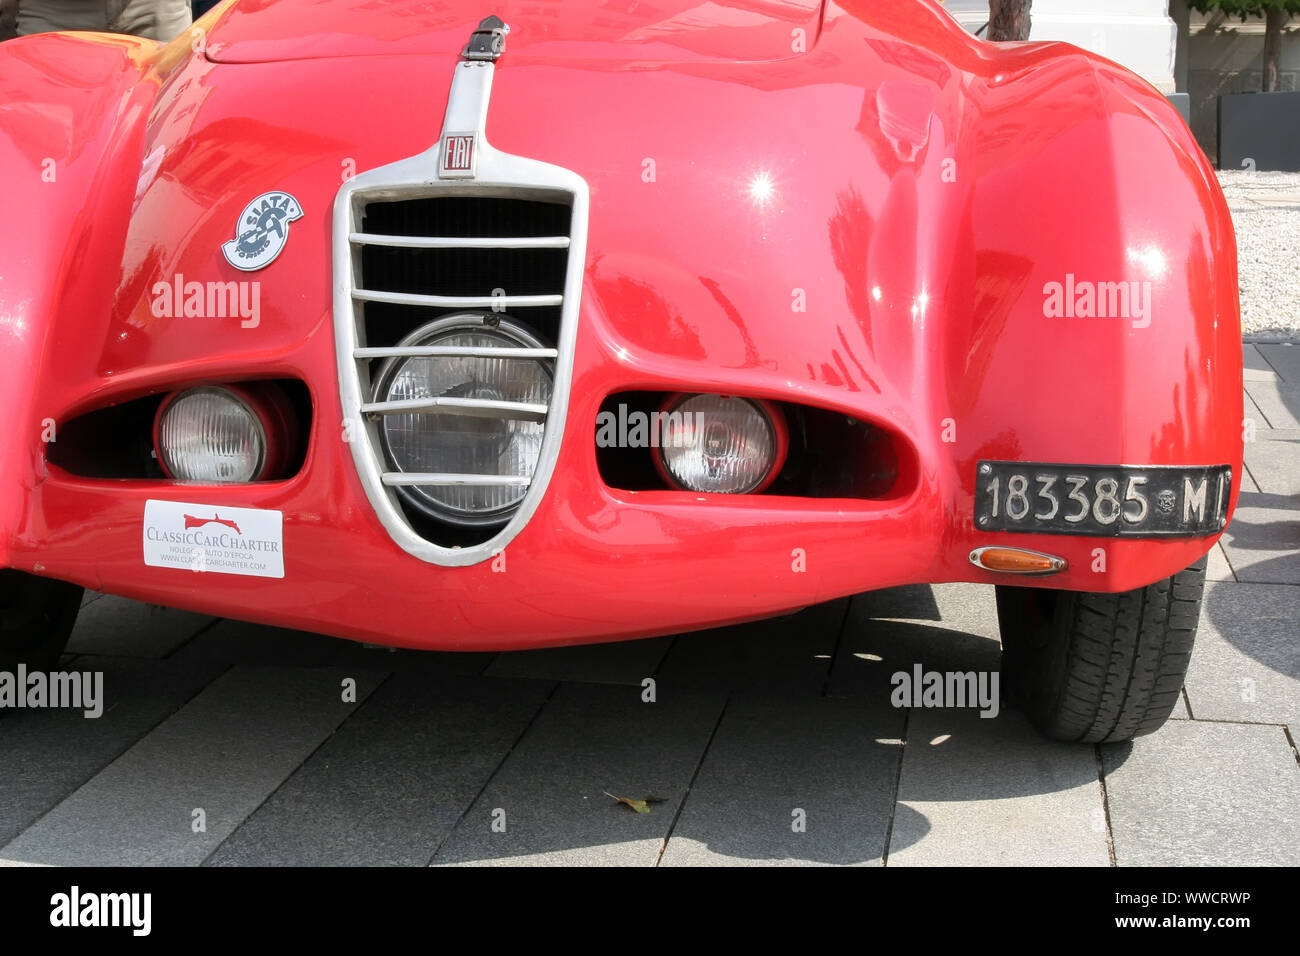 SERBIA, BELGRADE - SEPTEMBER 7, 2019: An Old timer car on display at the "24 hours of elegance" show on September 7, 2019 in Belgrade, Serbia. Stock Photo